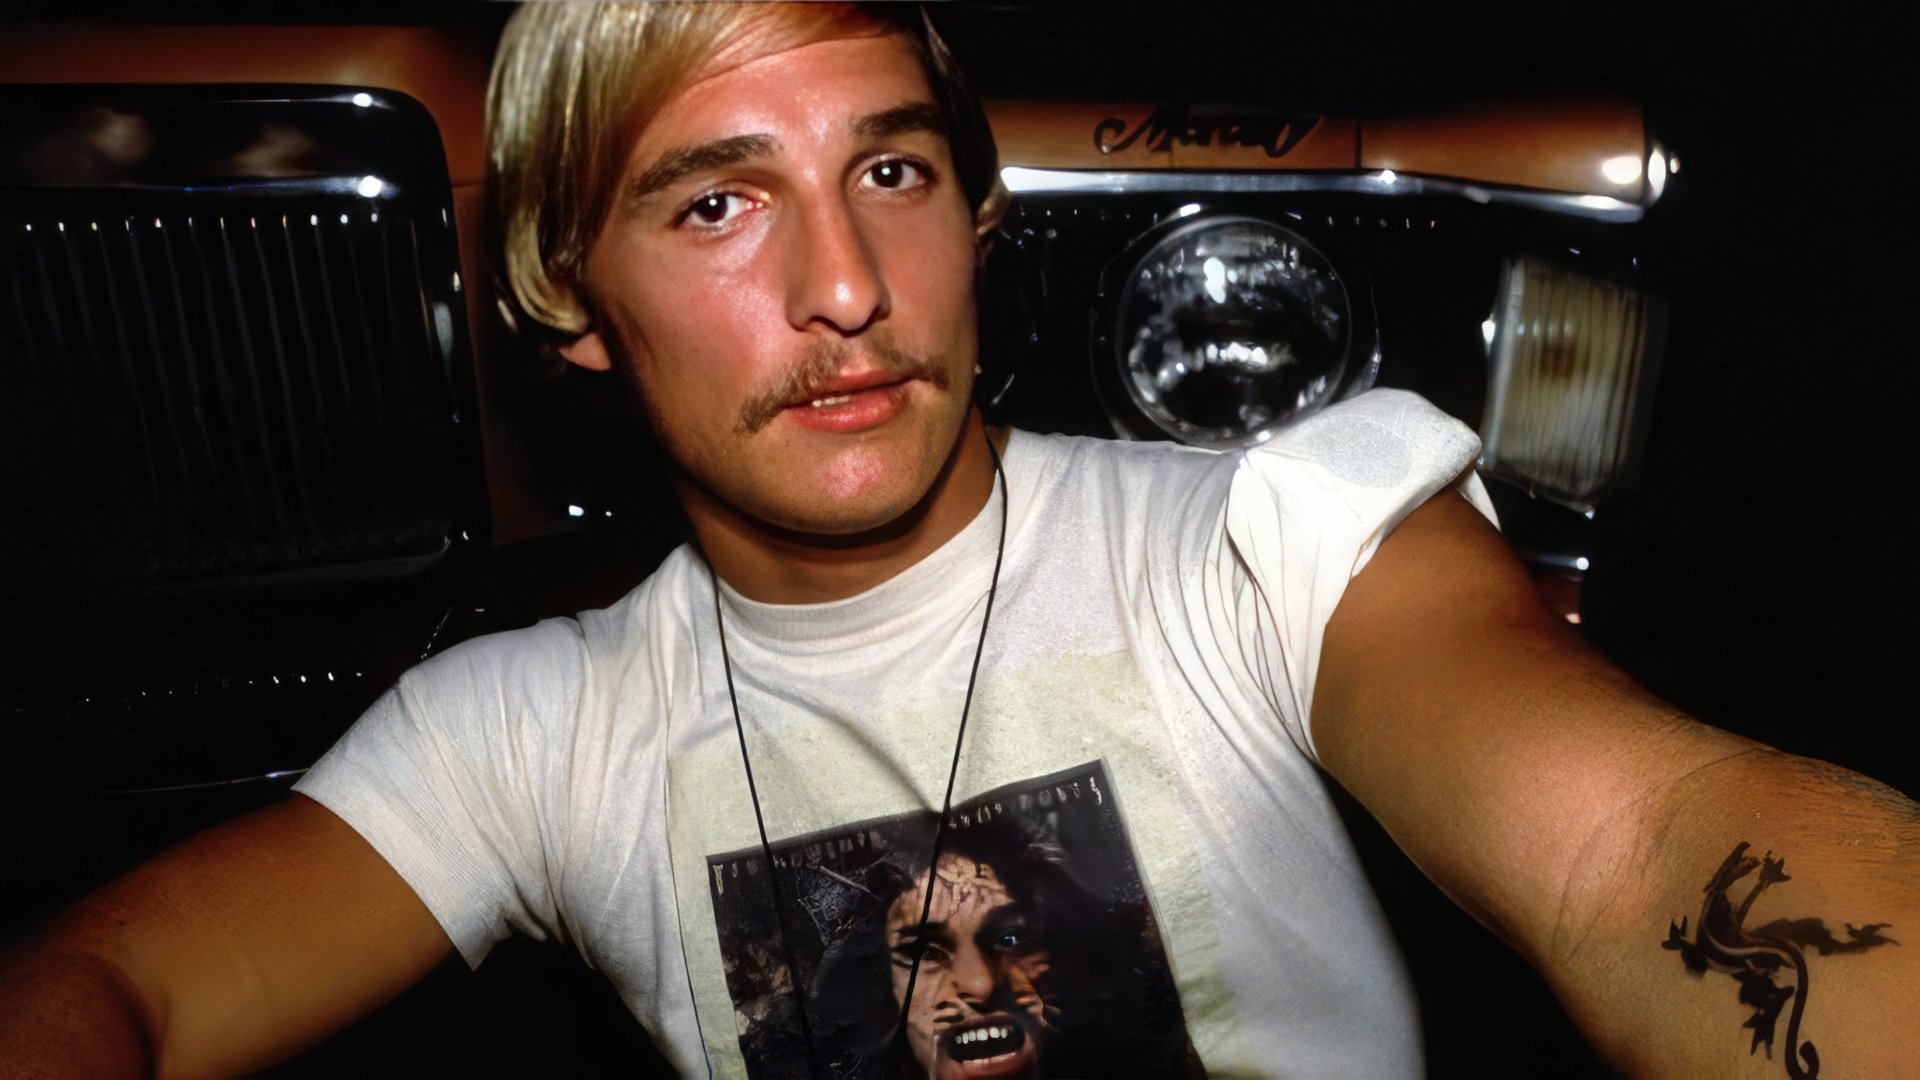 McConaughey’s first role – Wooderson from the «Dazed and Confused»